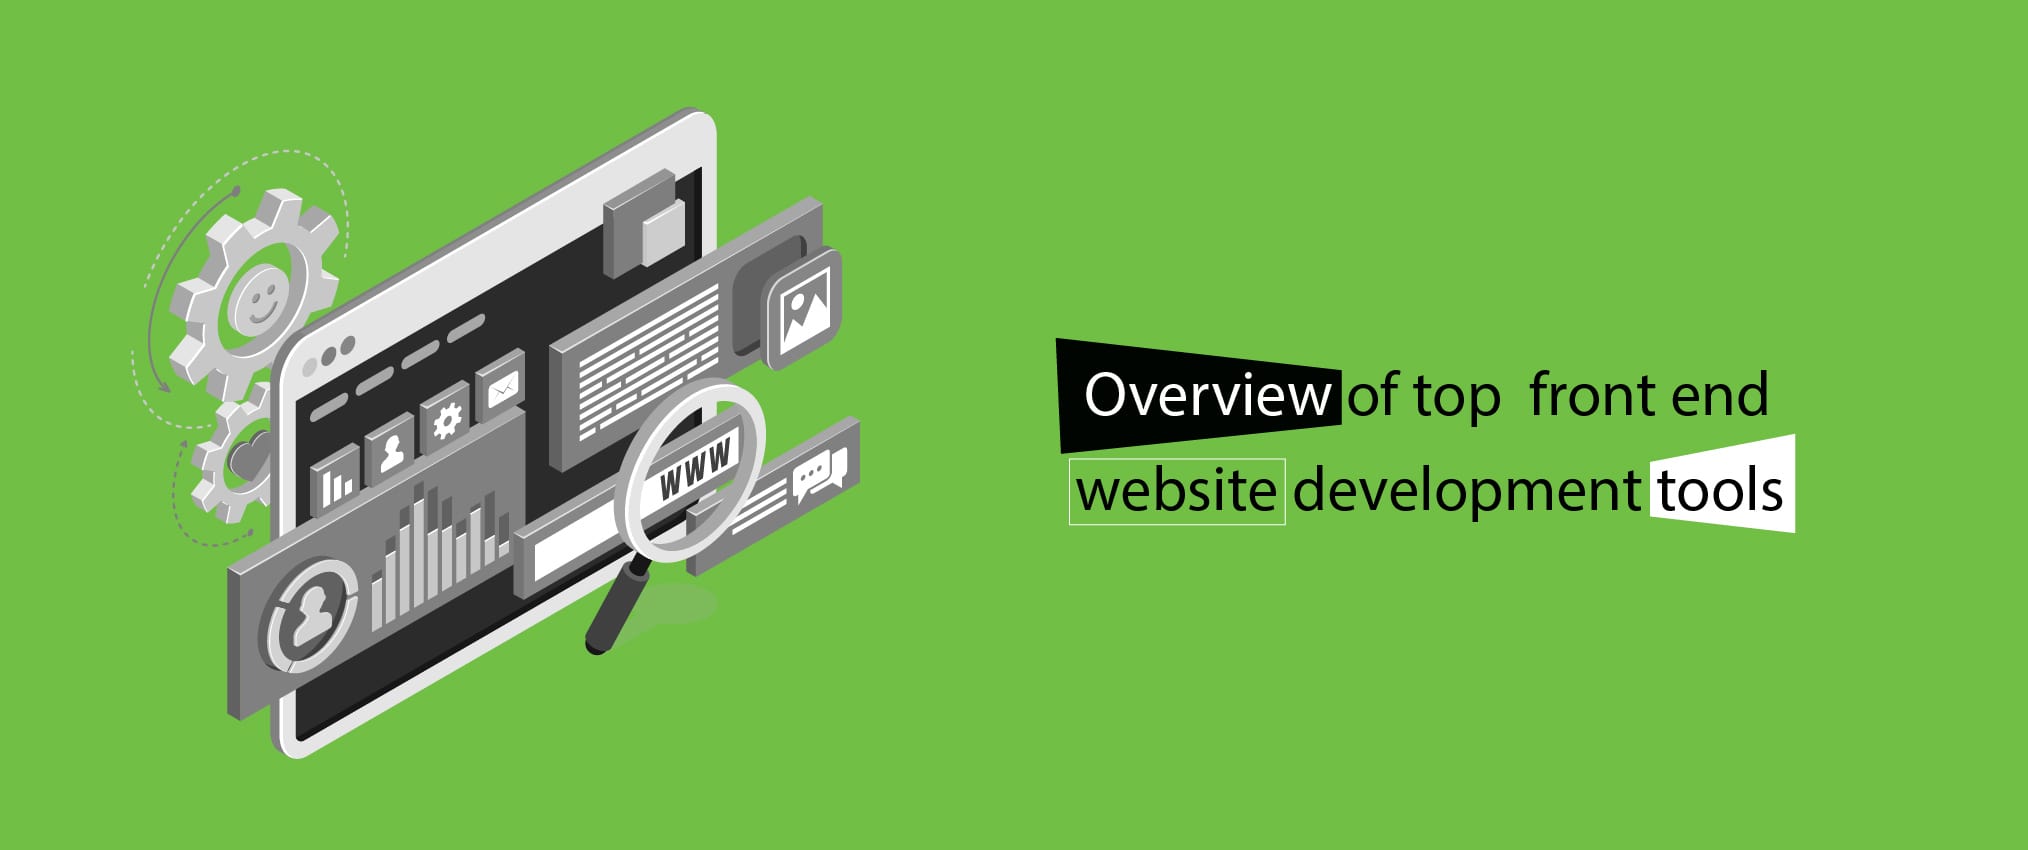 Overview of top front end website development tools